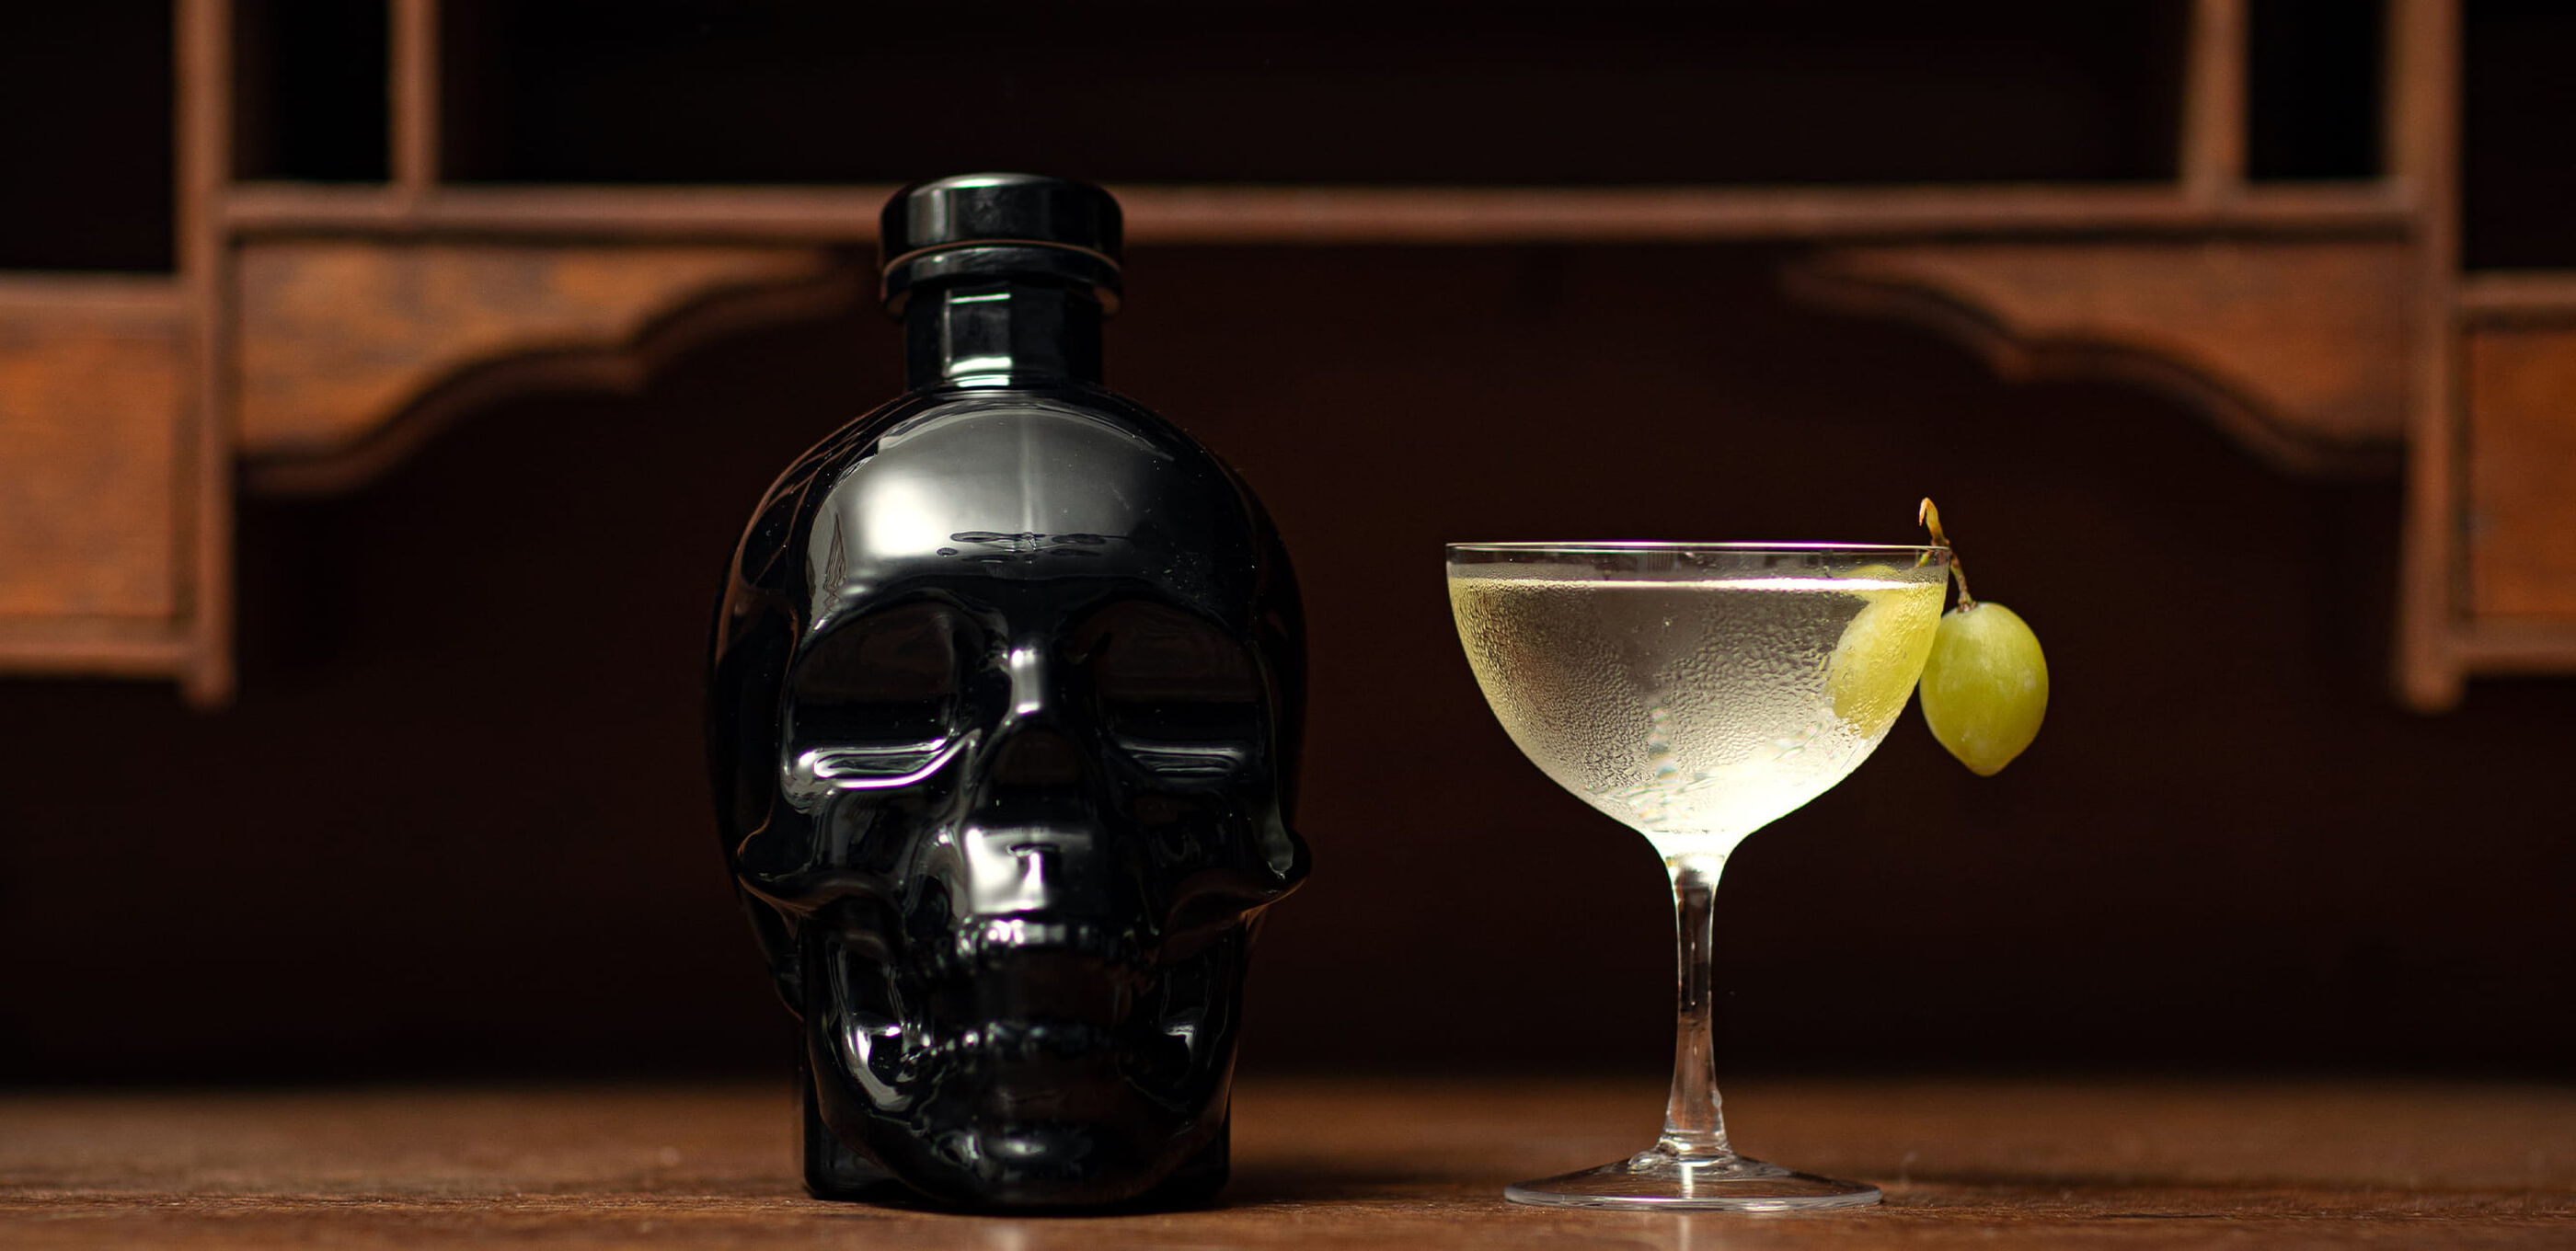 Crystal Head Onyx and a cocktail